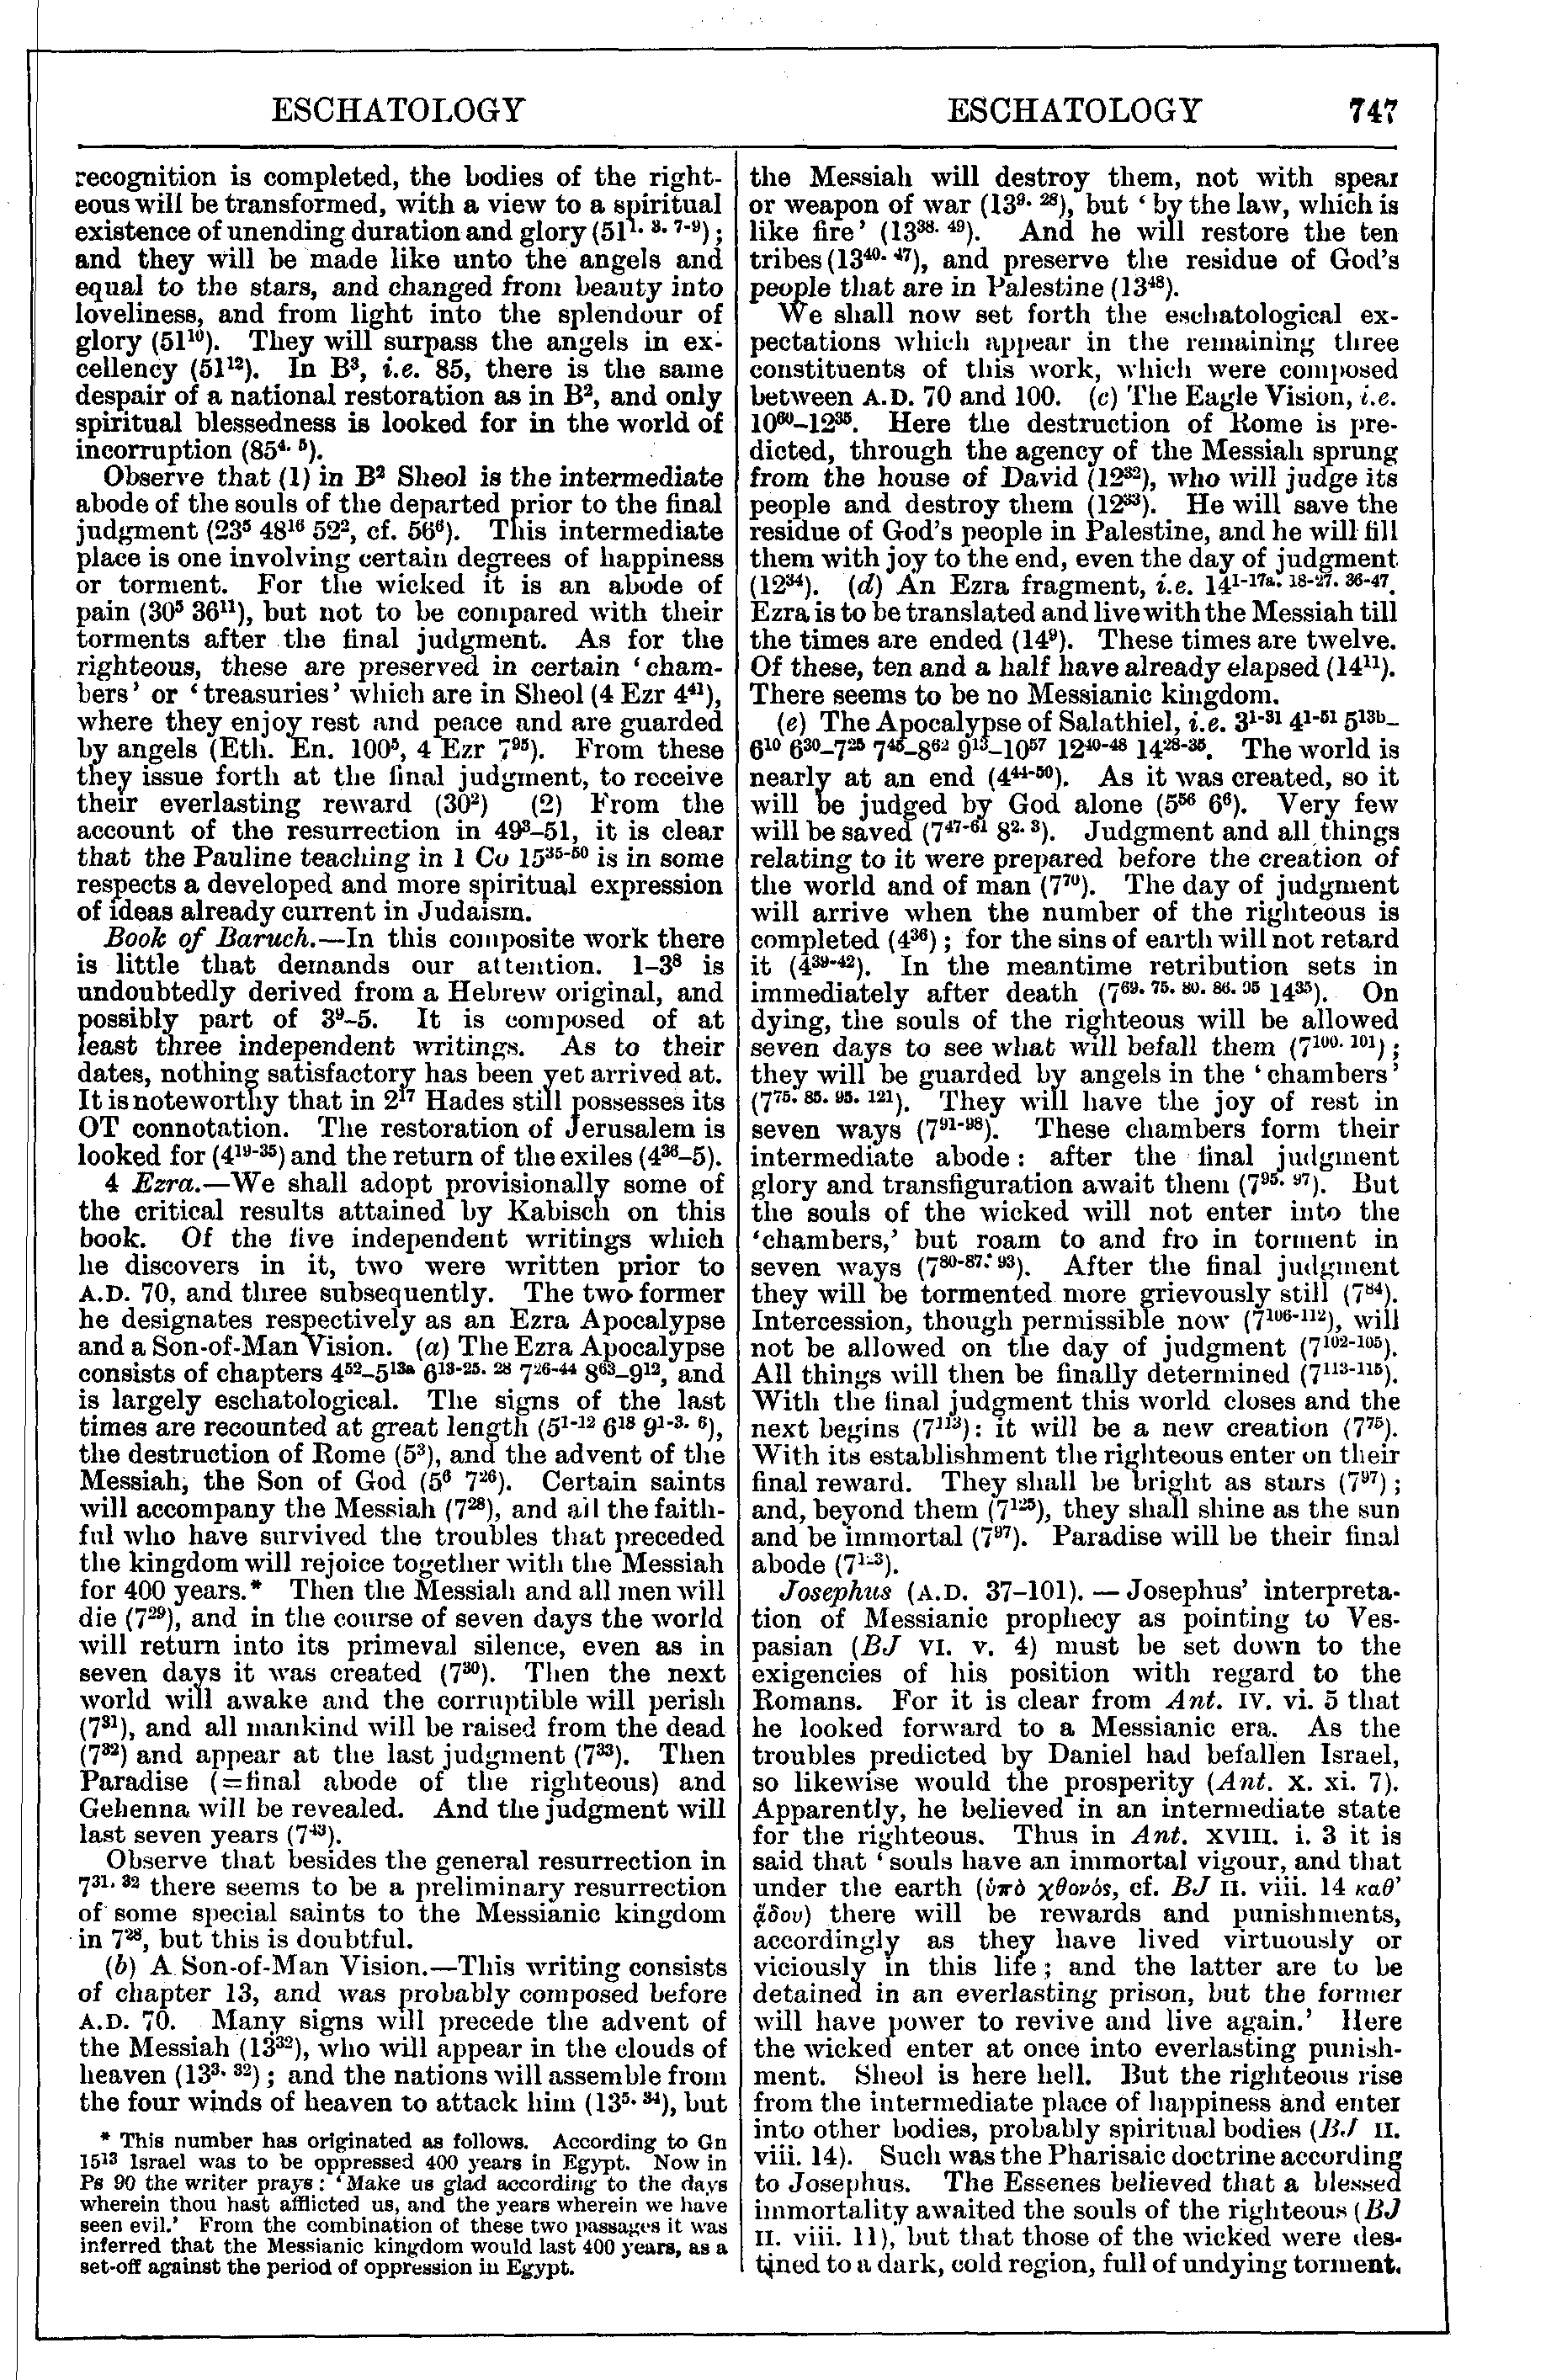 Image of page 747